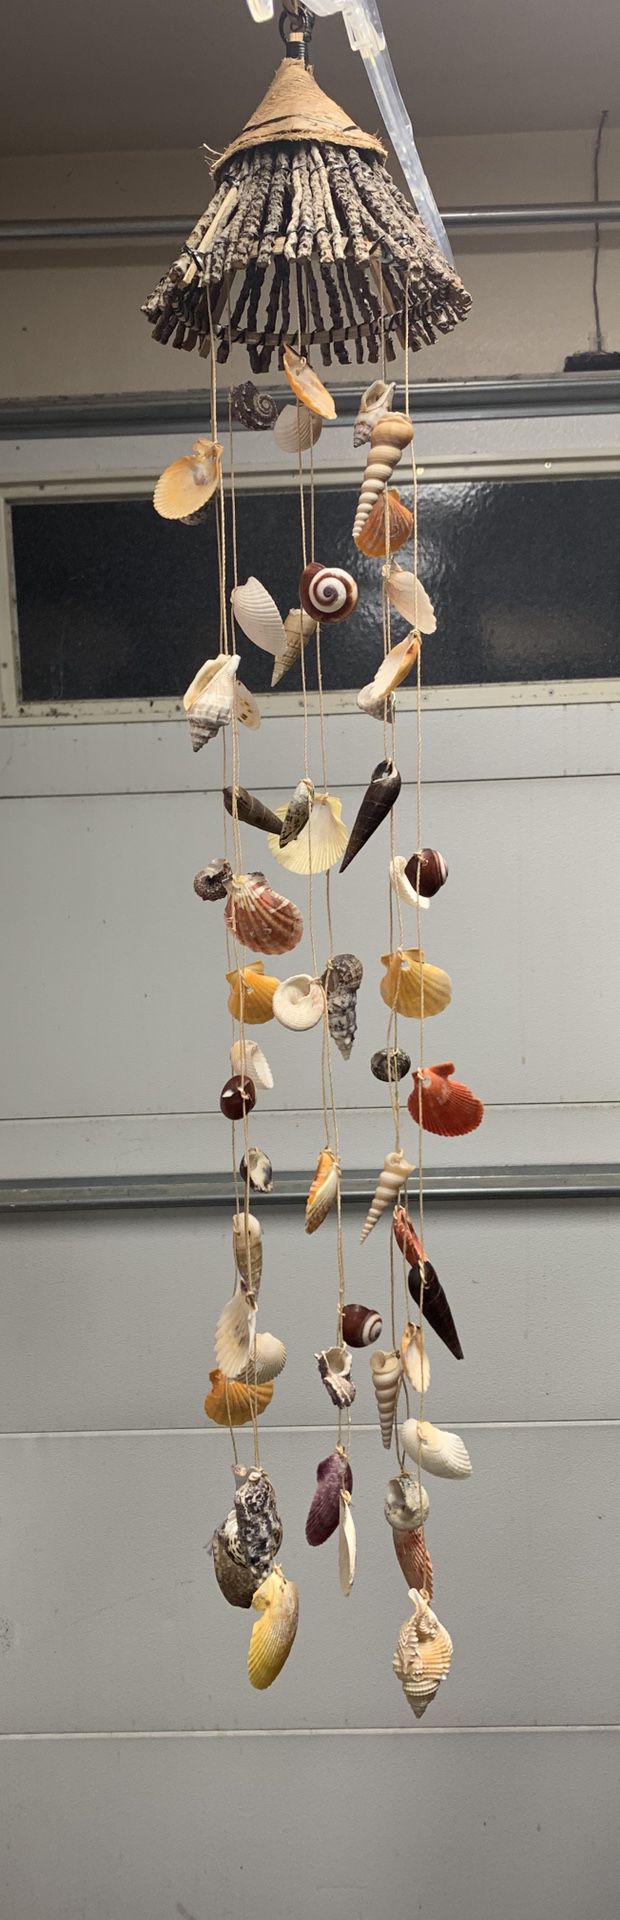 Sea shell wind chime 8 string